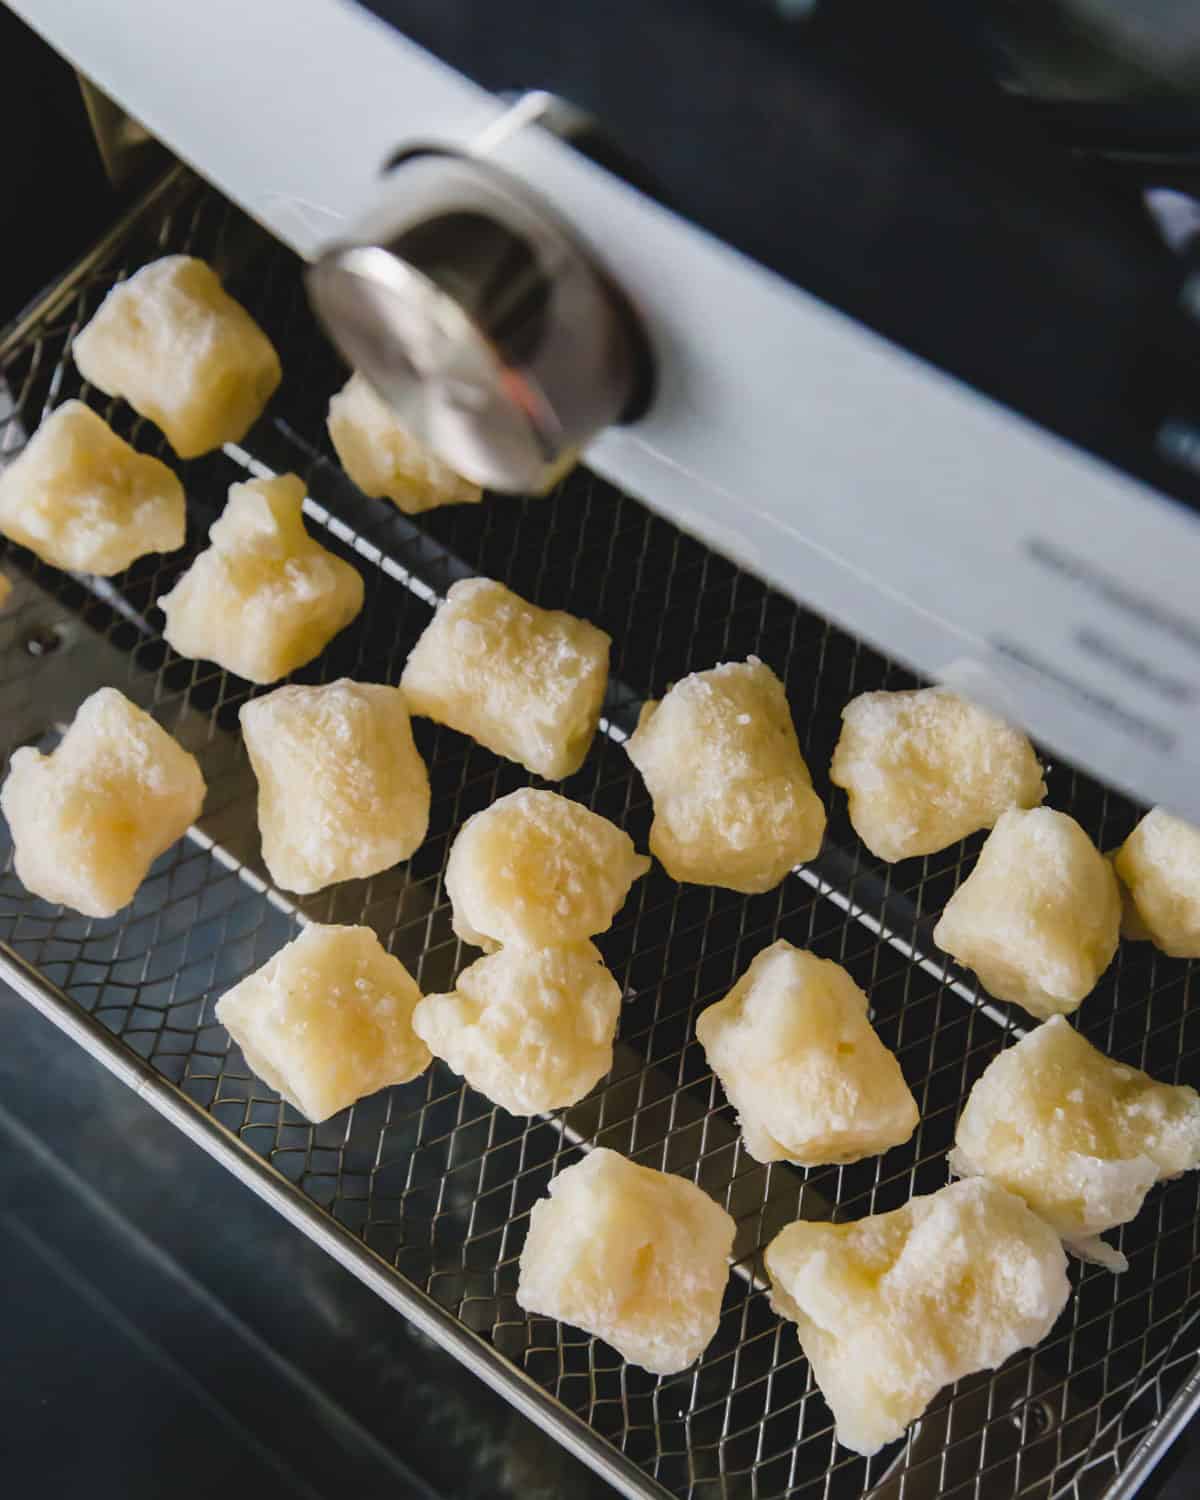 Frozen cauliflower gnocchi is cooked in the air fryer from a frozen state at 400 degrees for 18 minutes.